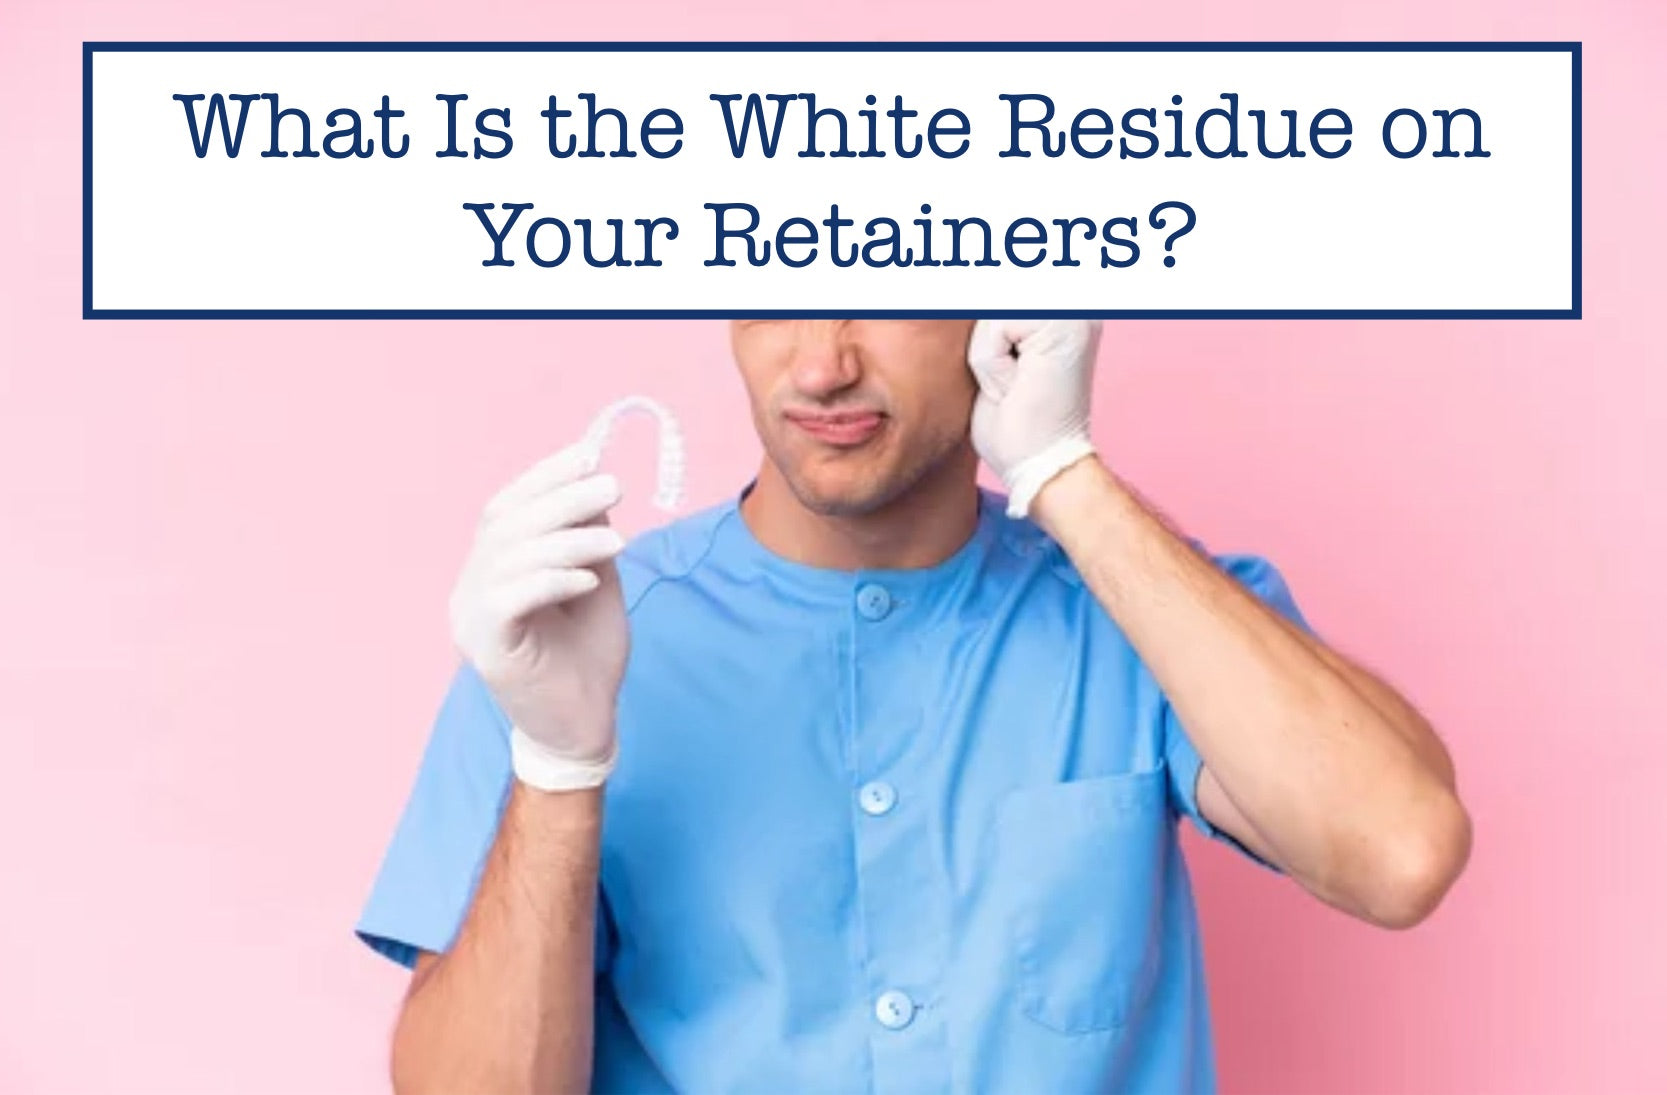 What Is the White Residue on Your Retainers?